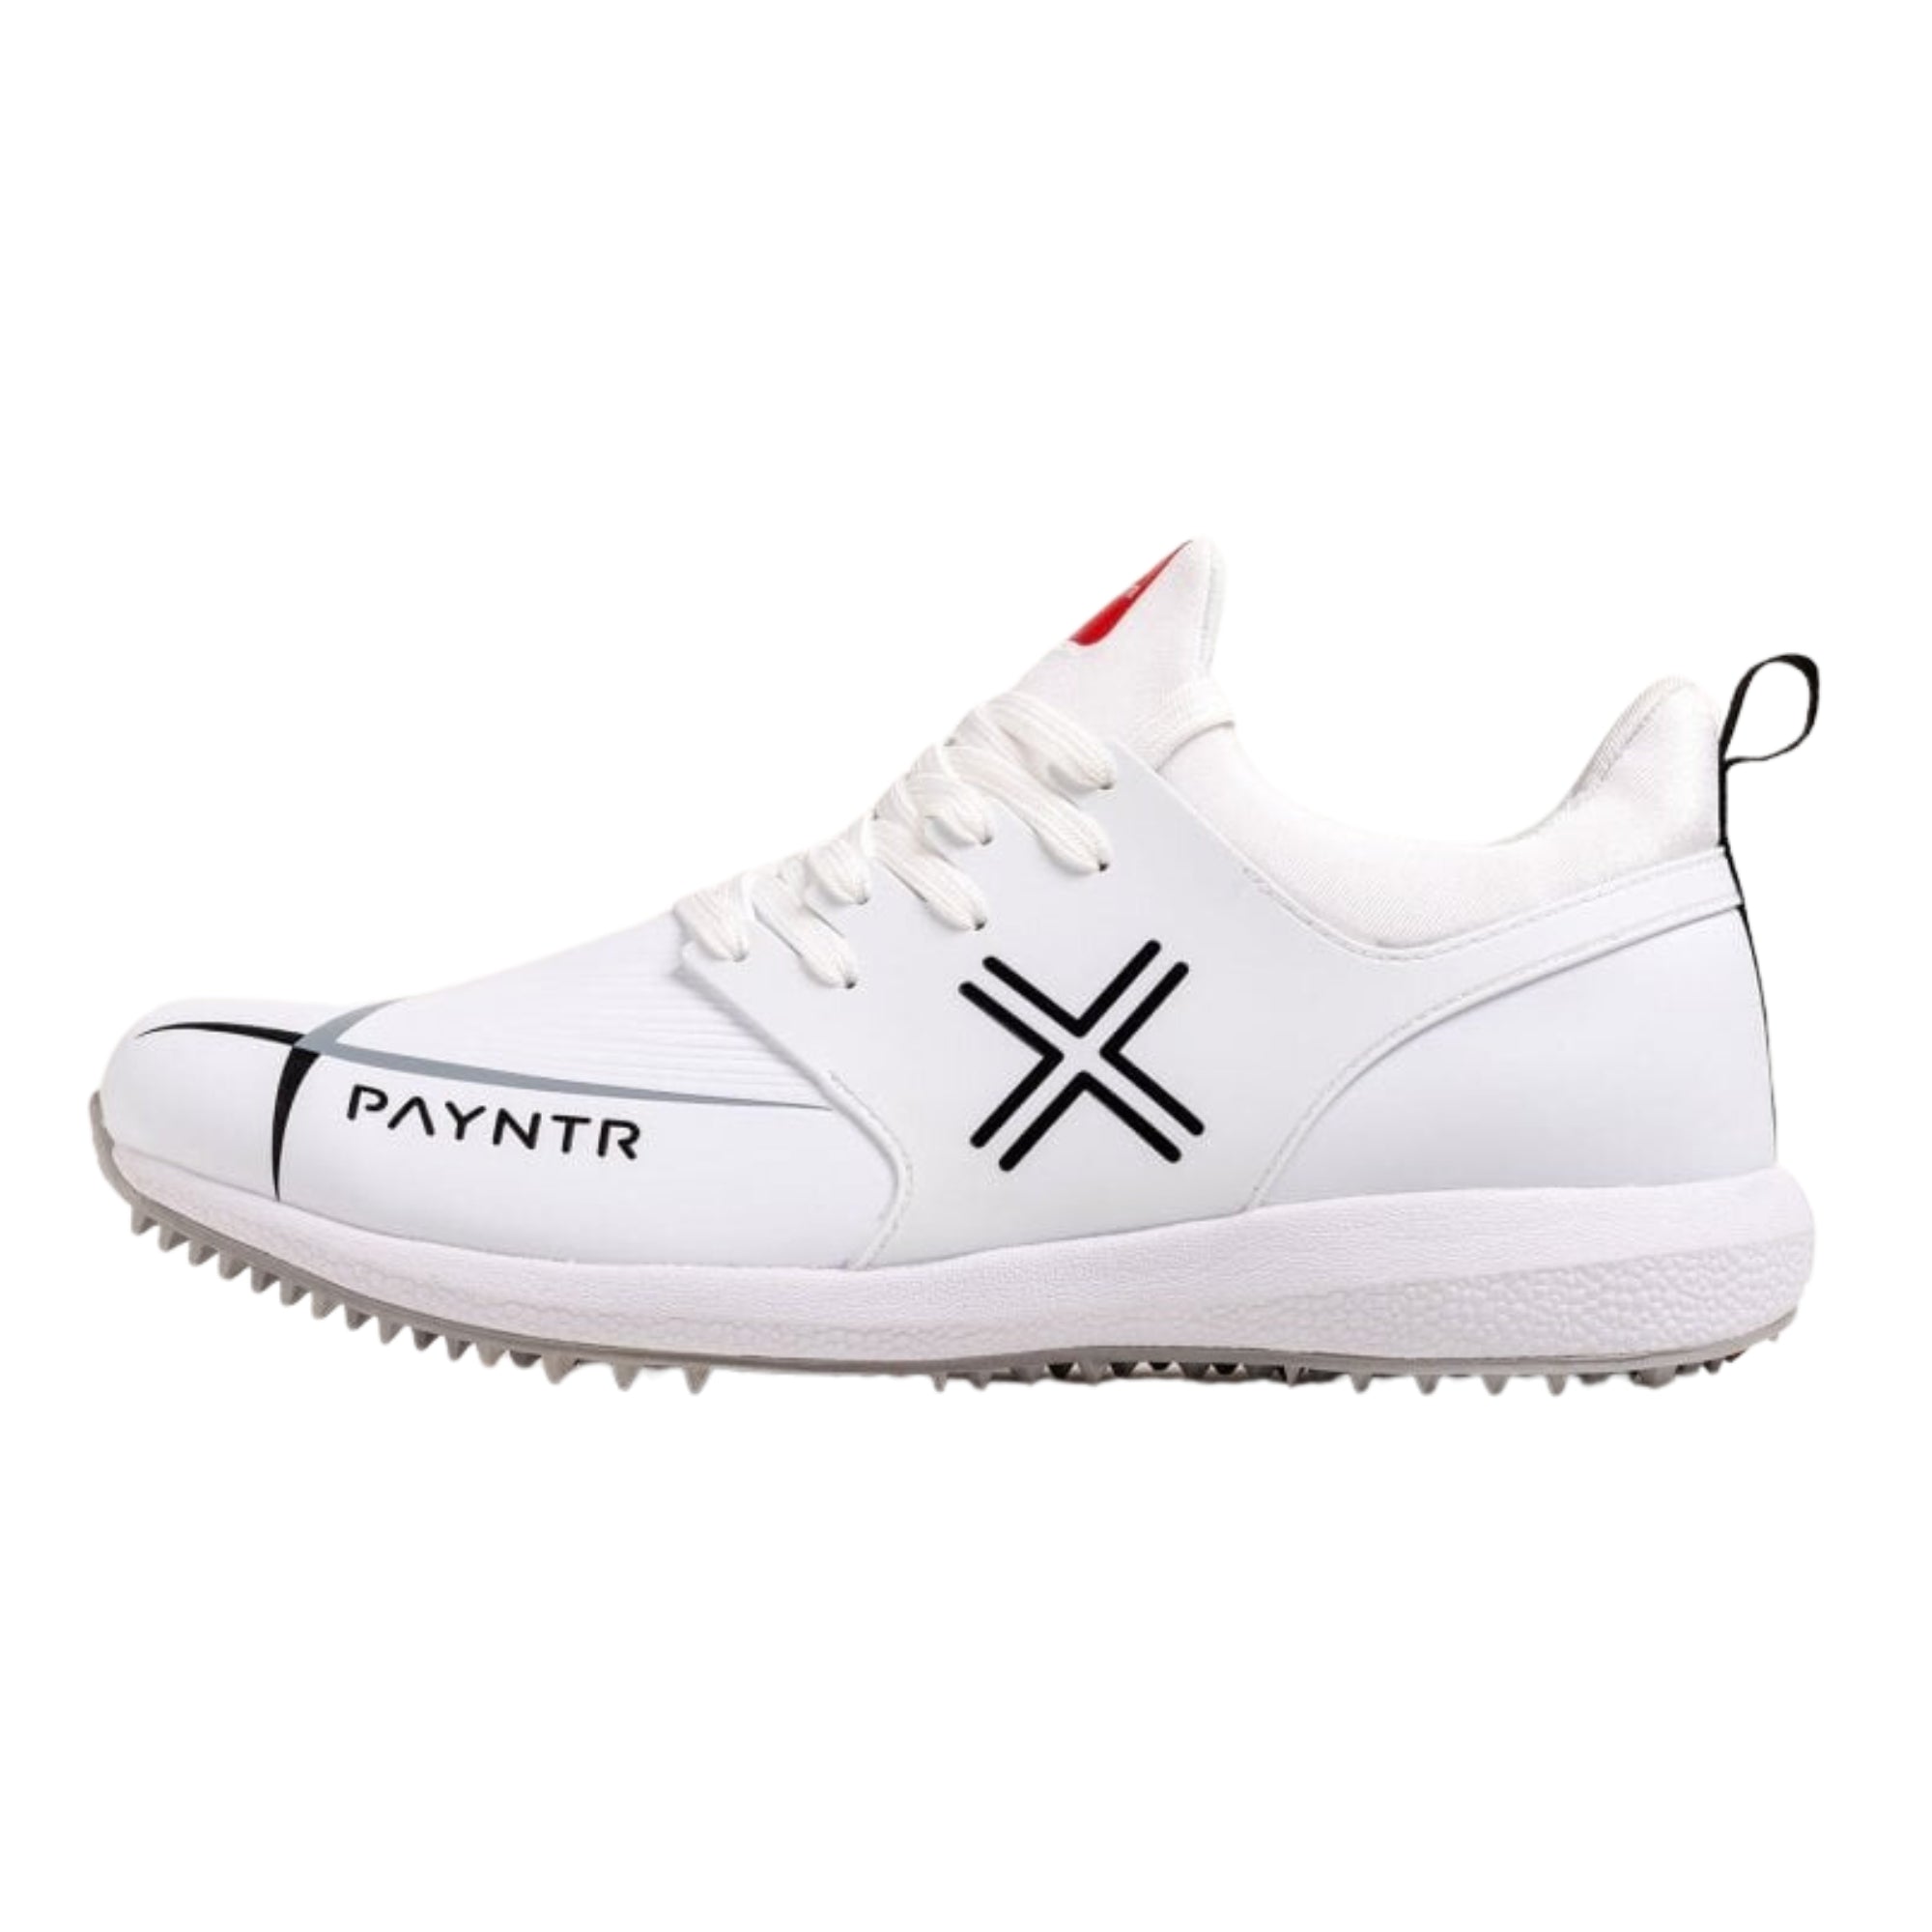 Payntr Cricket Shoes, Model X MK3 Pimple - All White